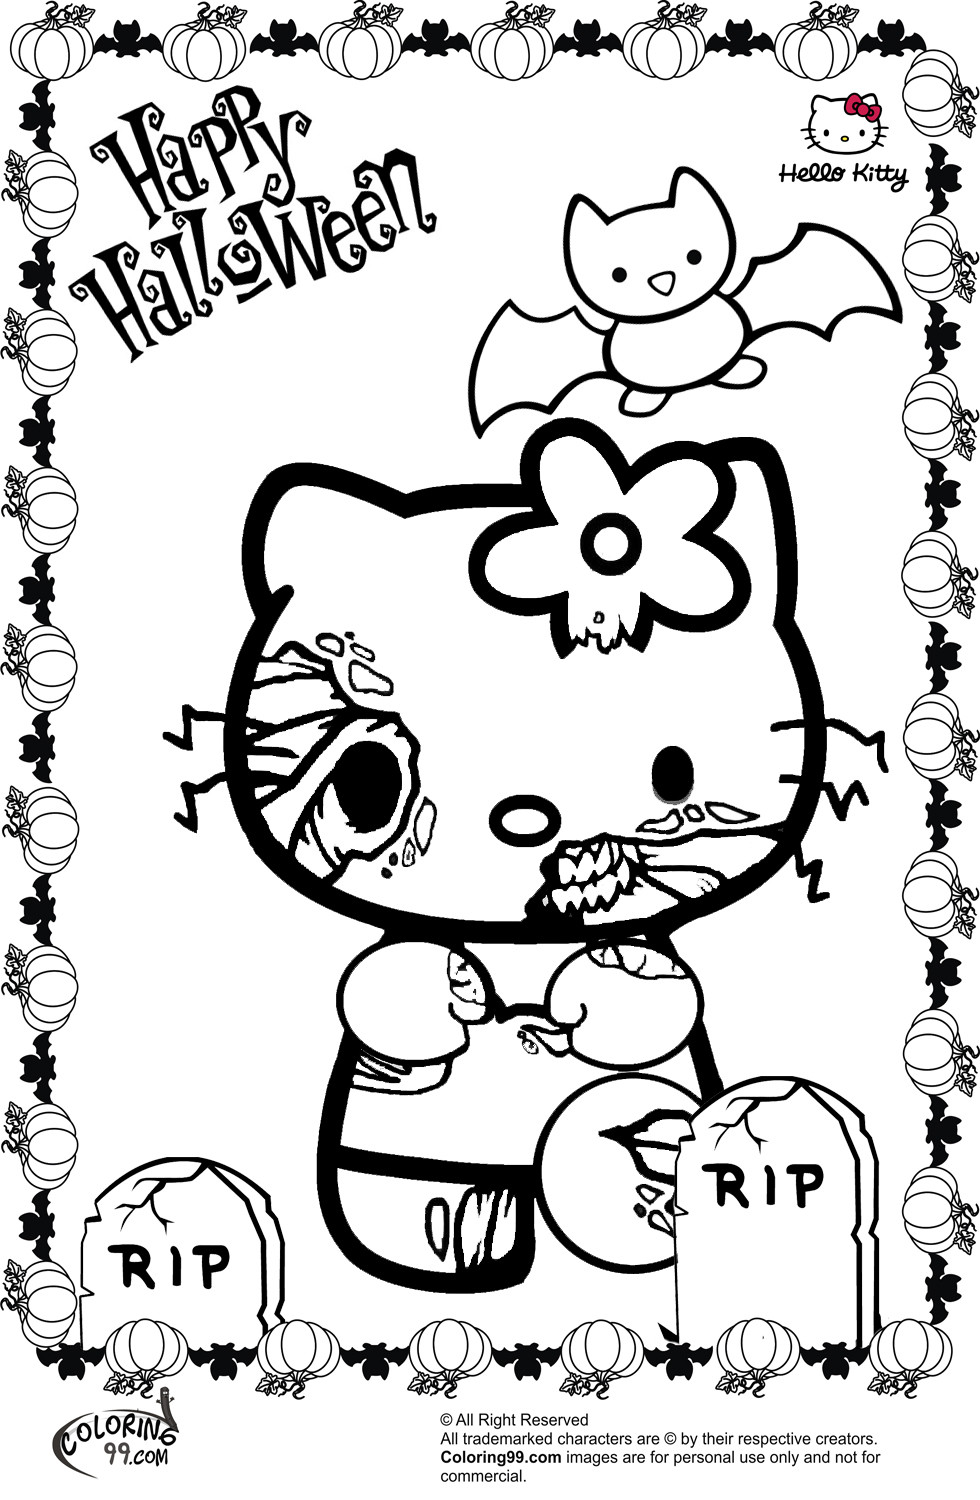 Halloweeen Coloring Pages For Teens
 Disney Zombie Coloring Pages For Adults And Teens grig3